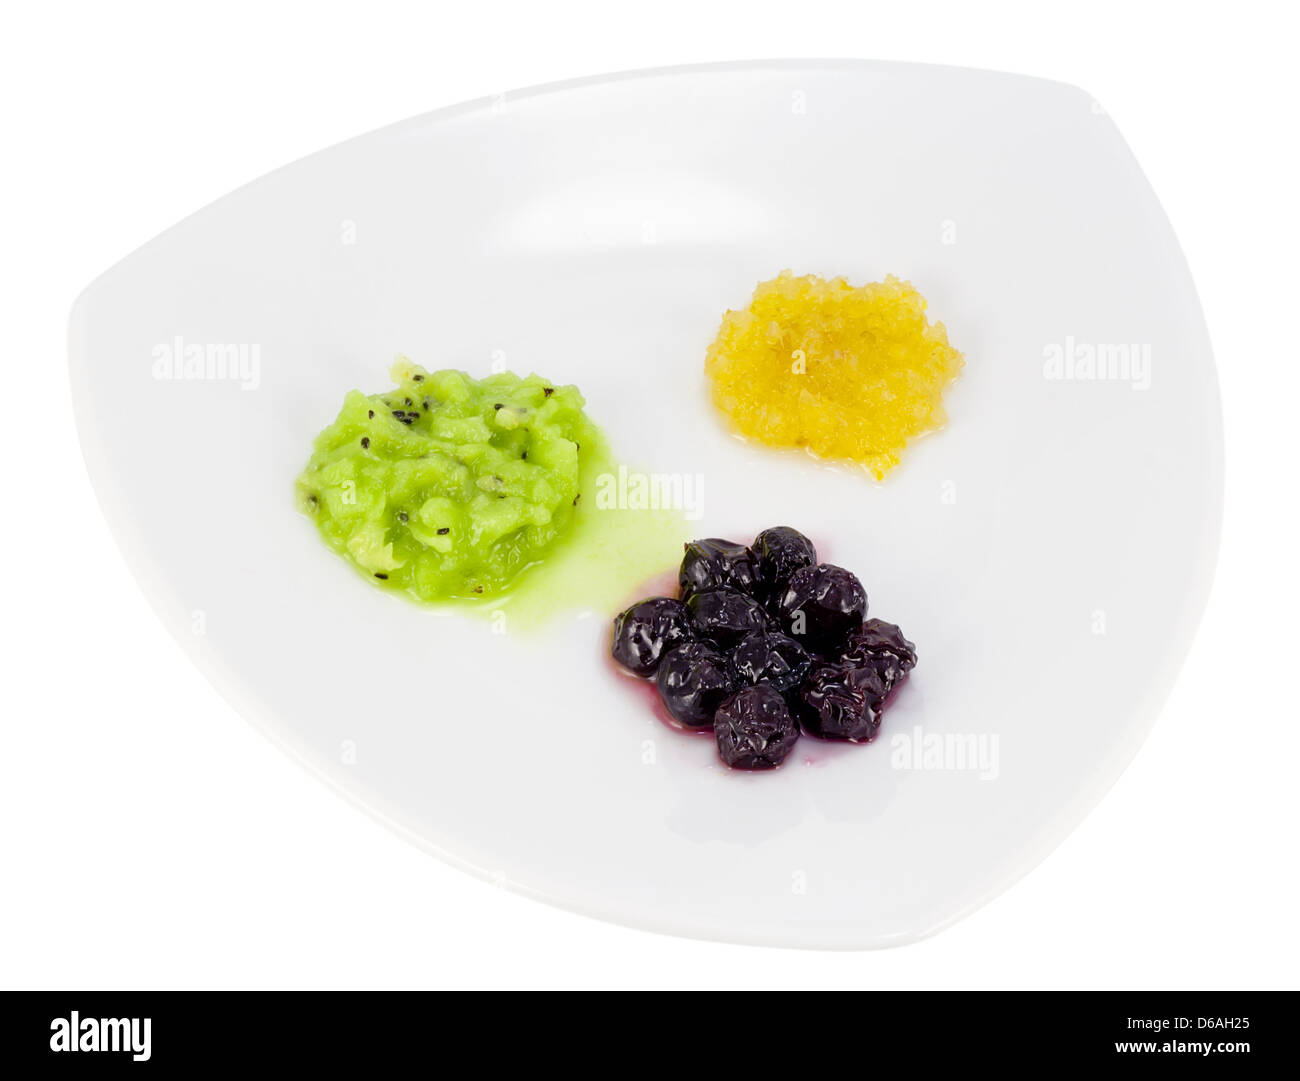 Minimalism in food concept Stock Photo